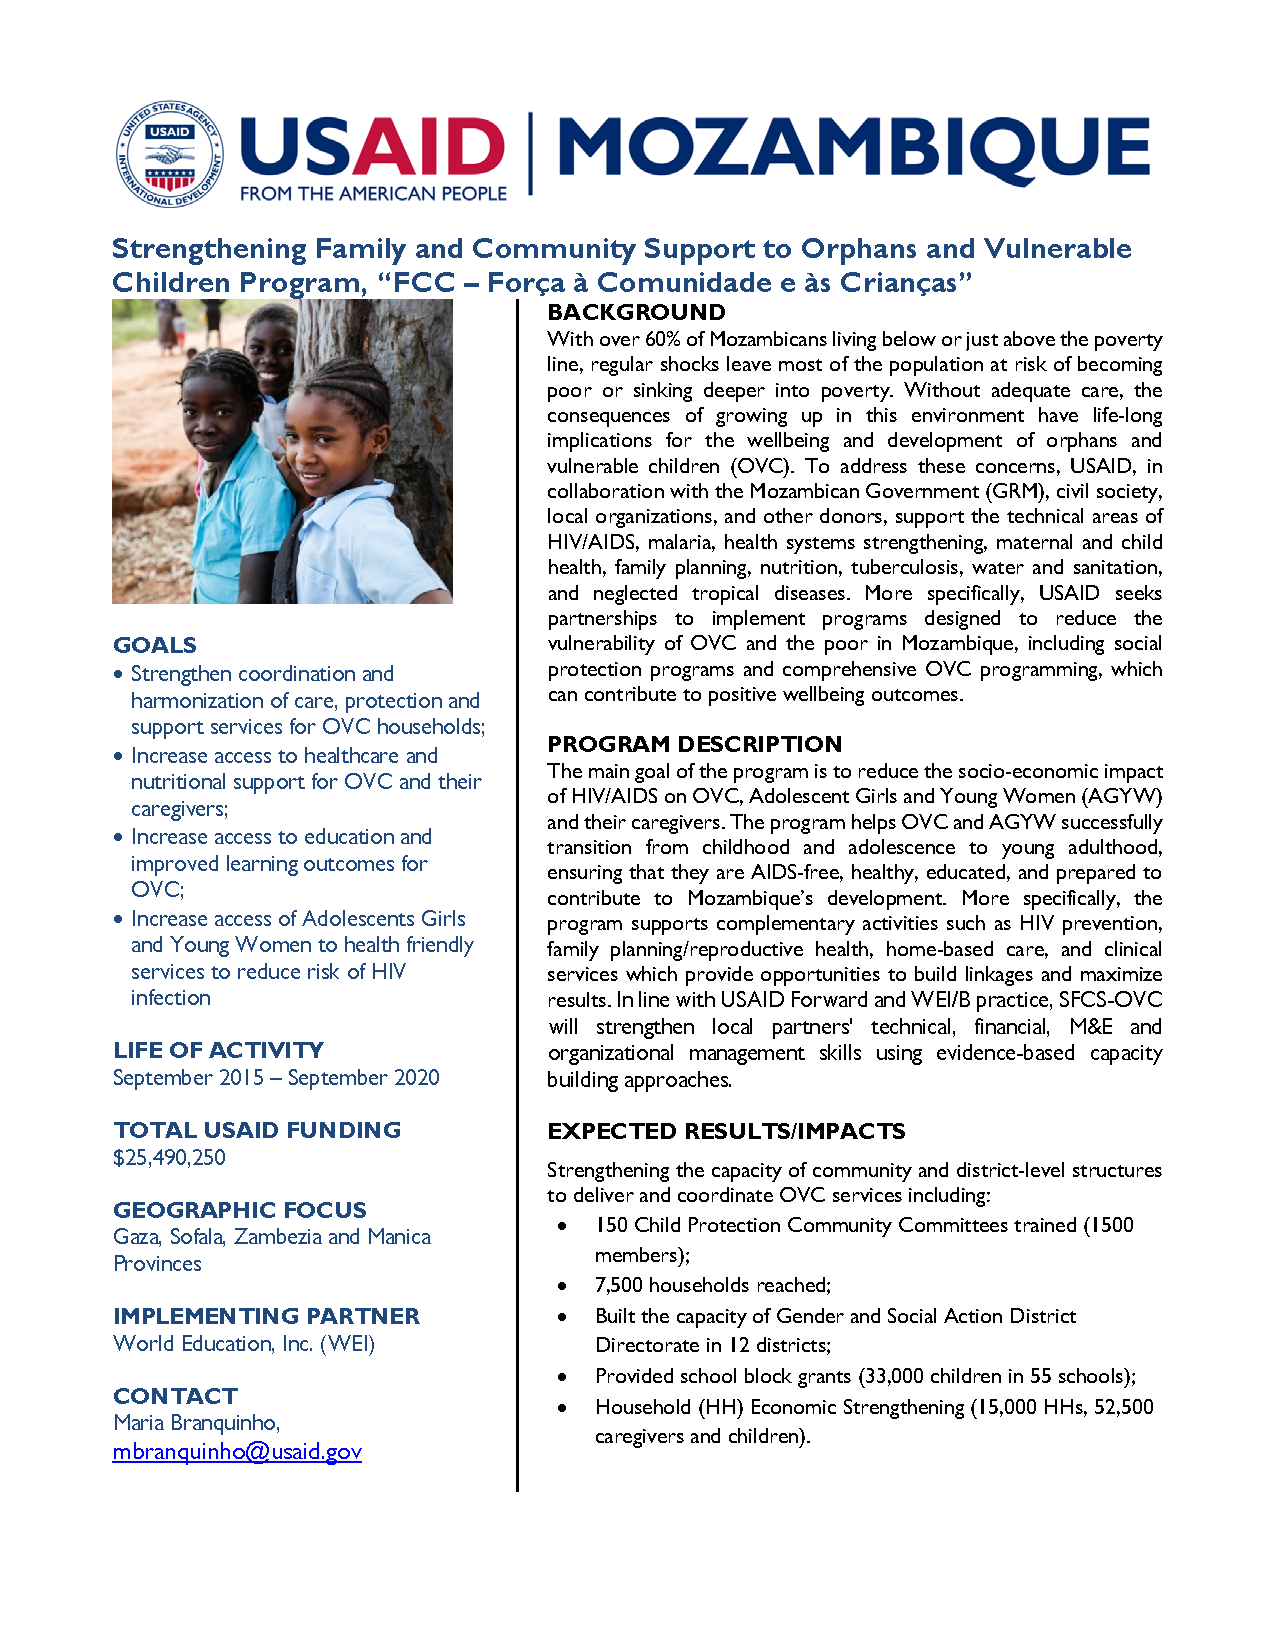 Strengthening Family and Community Support to Orphans and Vulnerable Children Program Fact Sheet